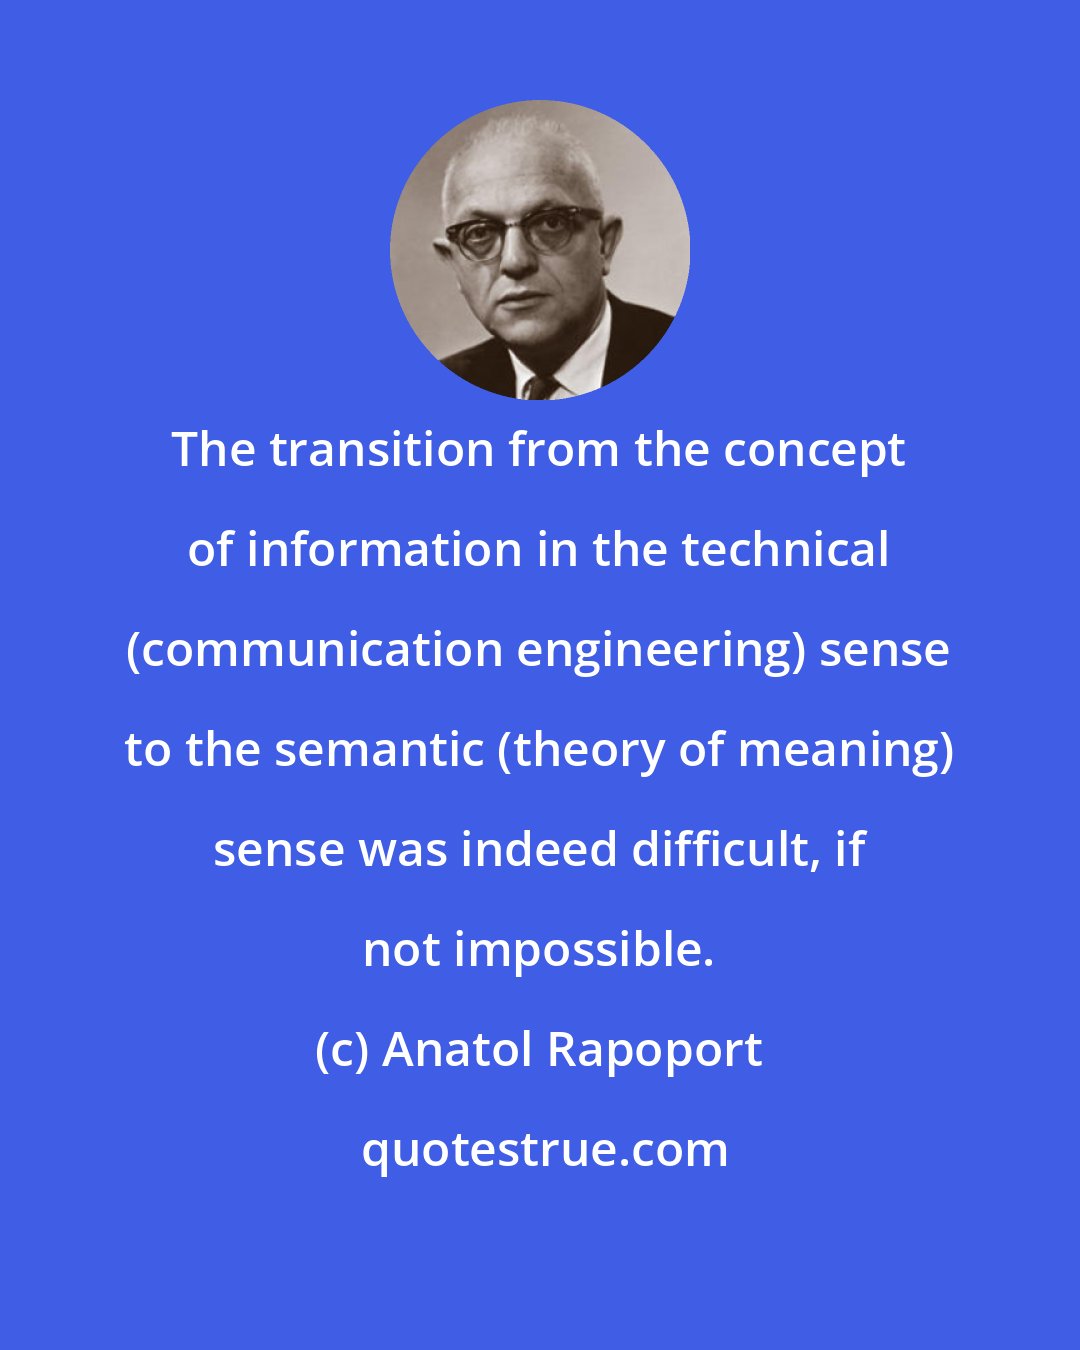 Anatol Rapoport: The transition from the concept of information in the technical (communication engineering) sense to the semantic (theory of meaning) sense was indeed difficult, if not impossible.